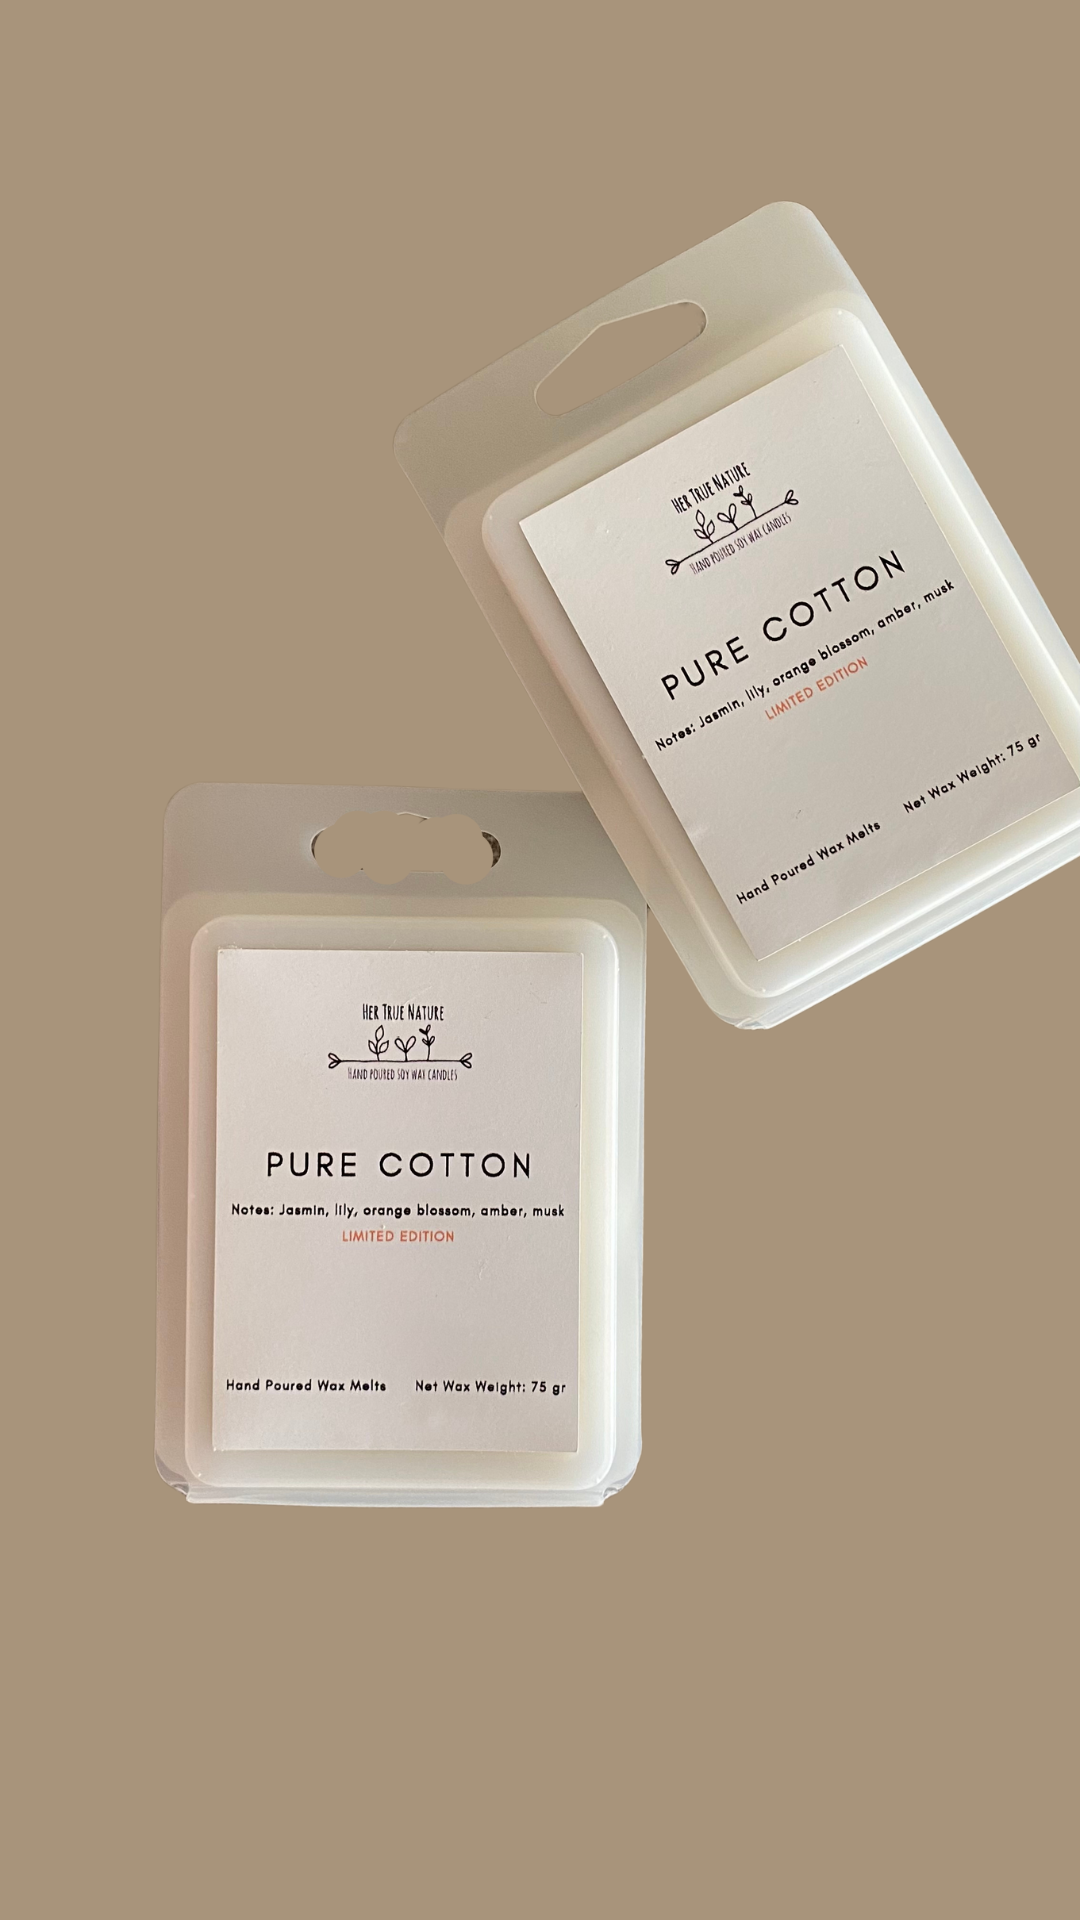 Limited Edition Pure Cotton wax melt pack